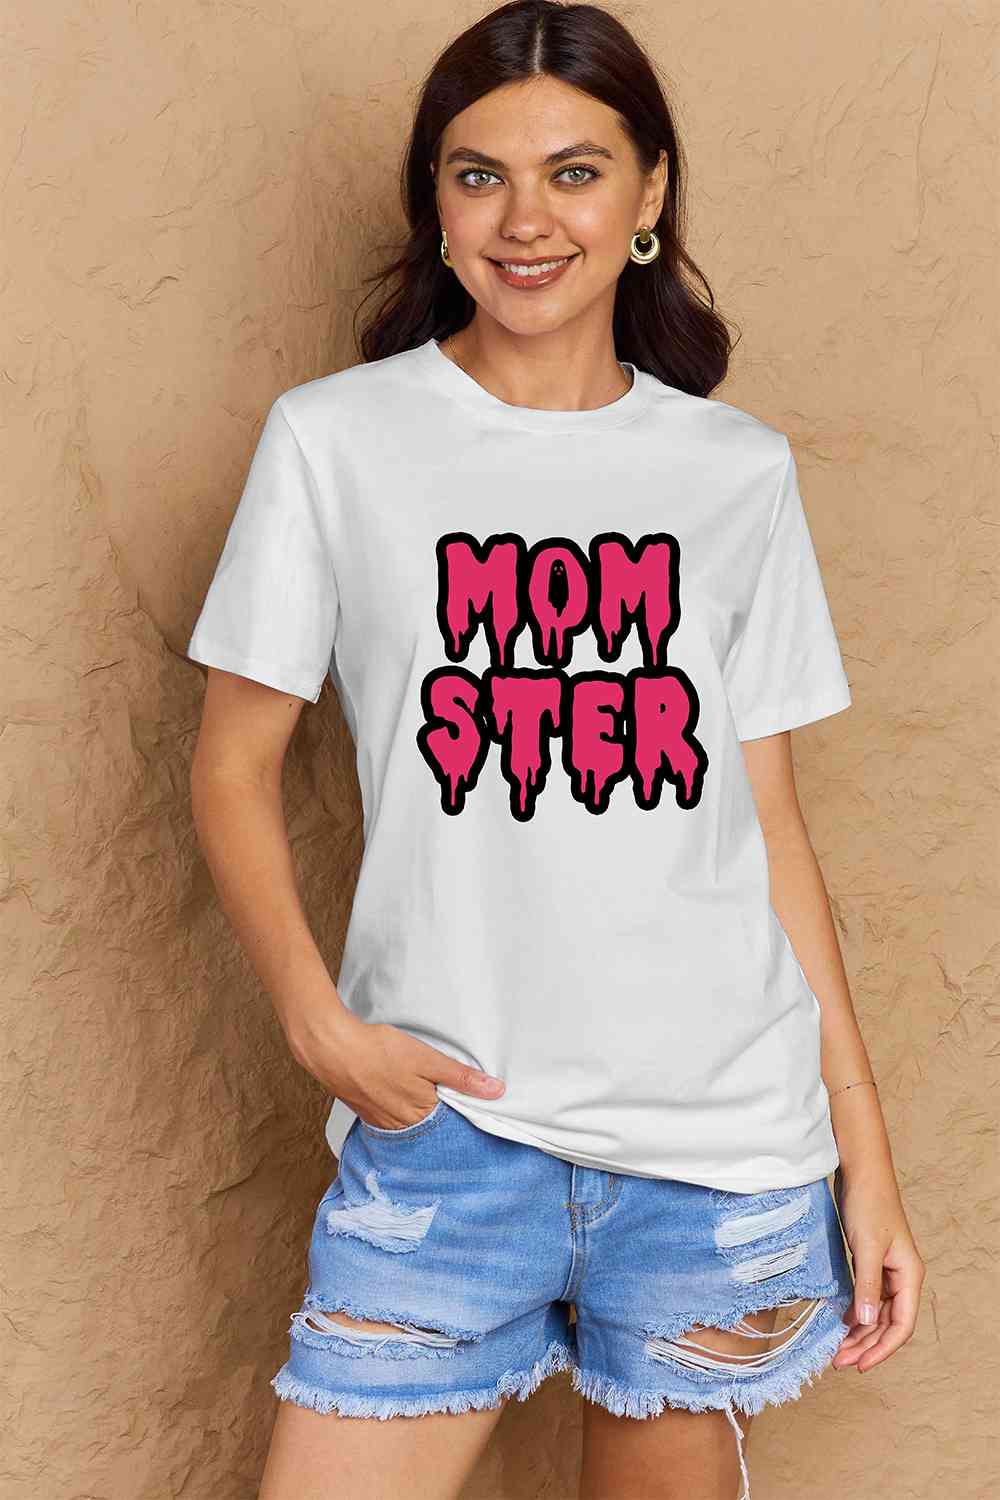 Simply Love Full Size MOM STER Graphic Cotton T-Shirt - Guy Christopher 